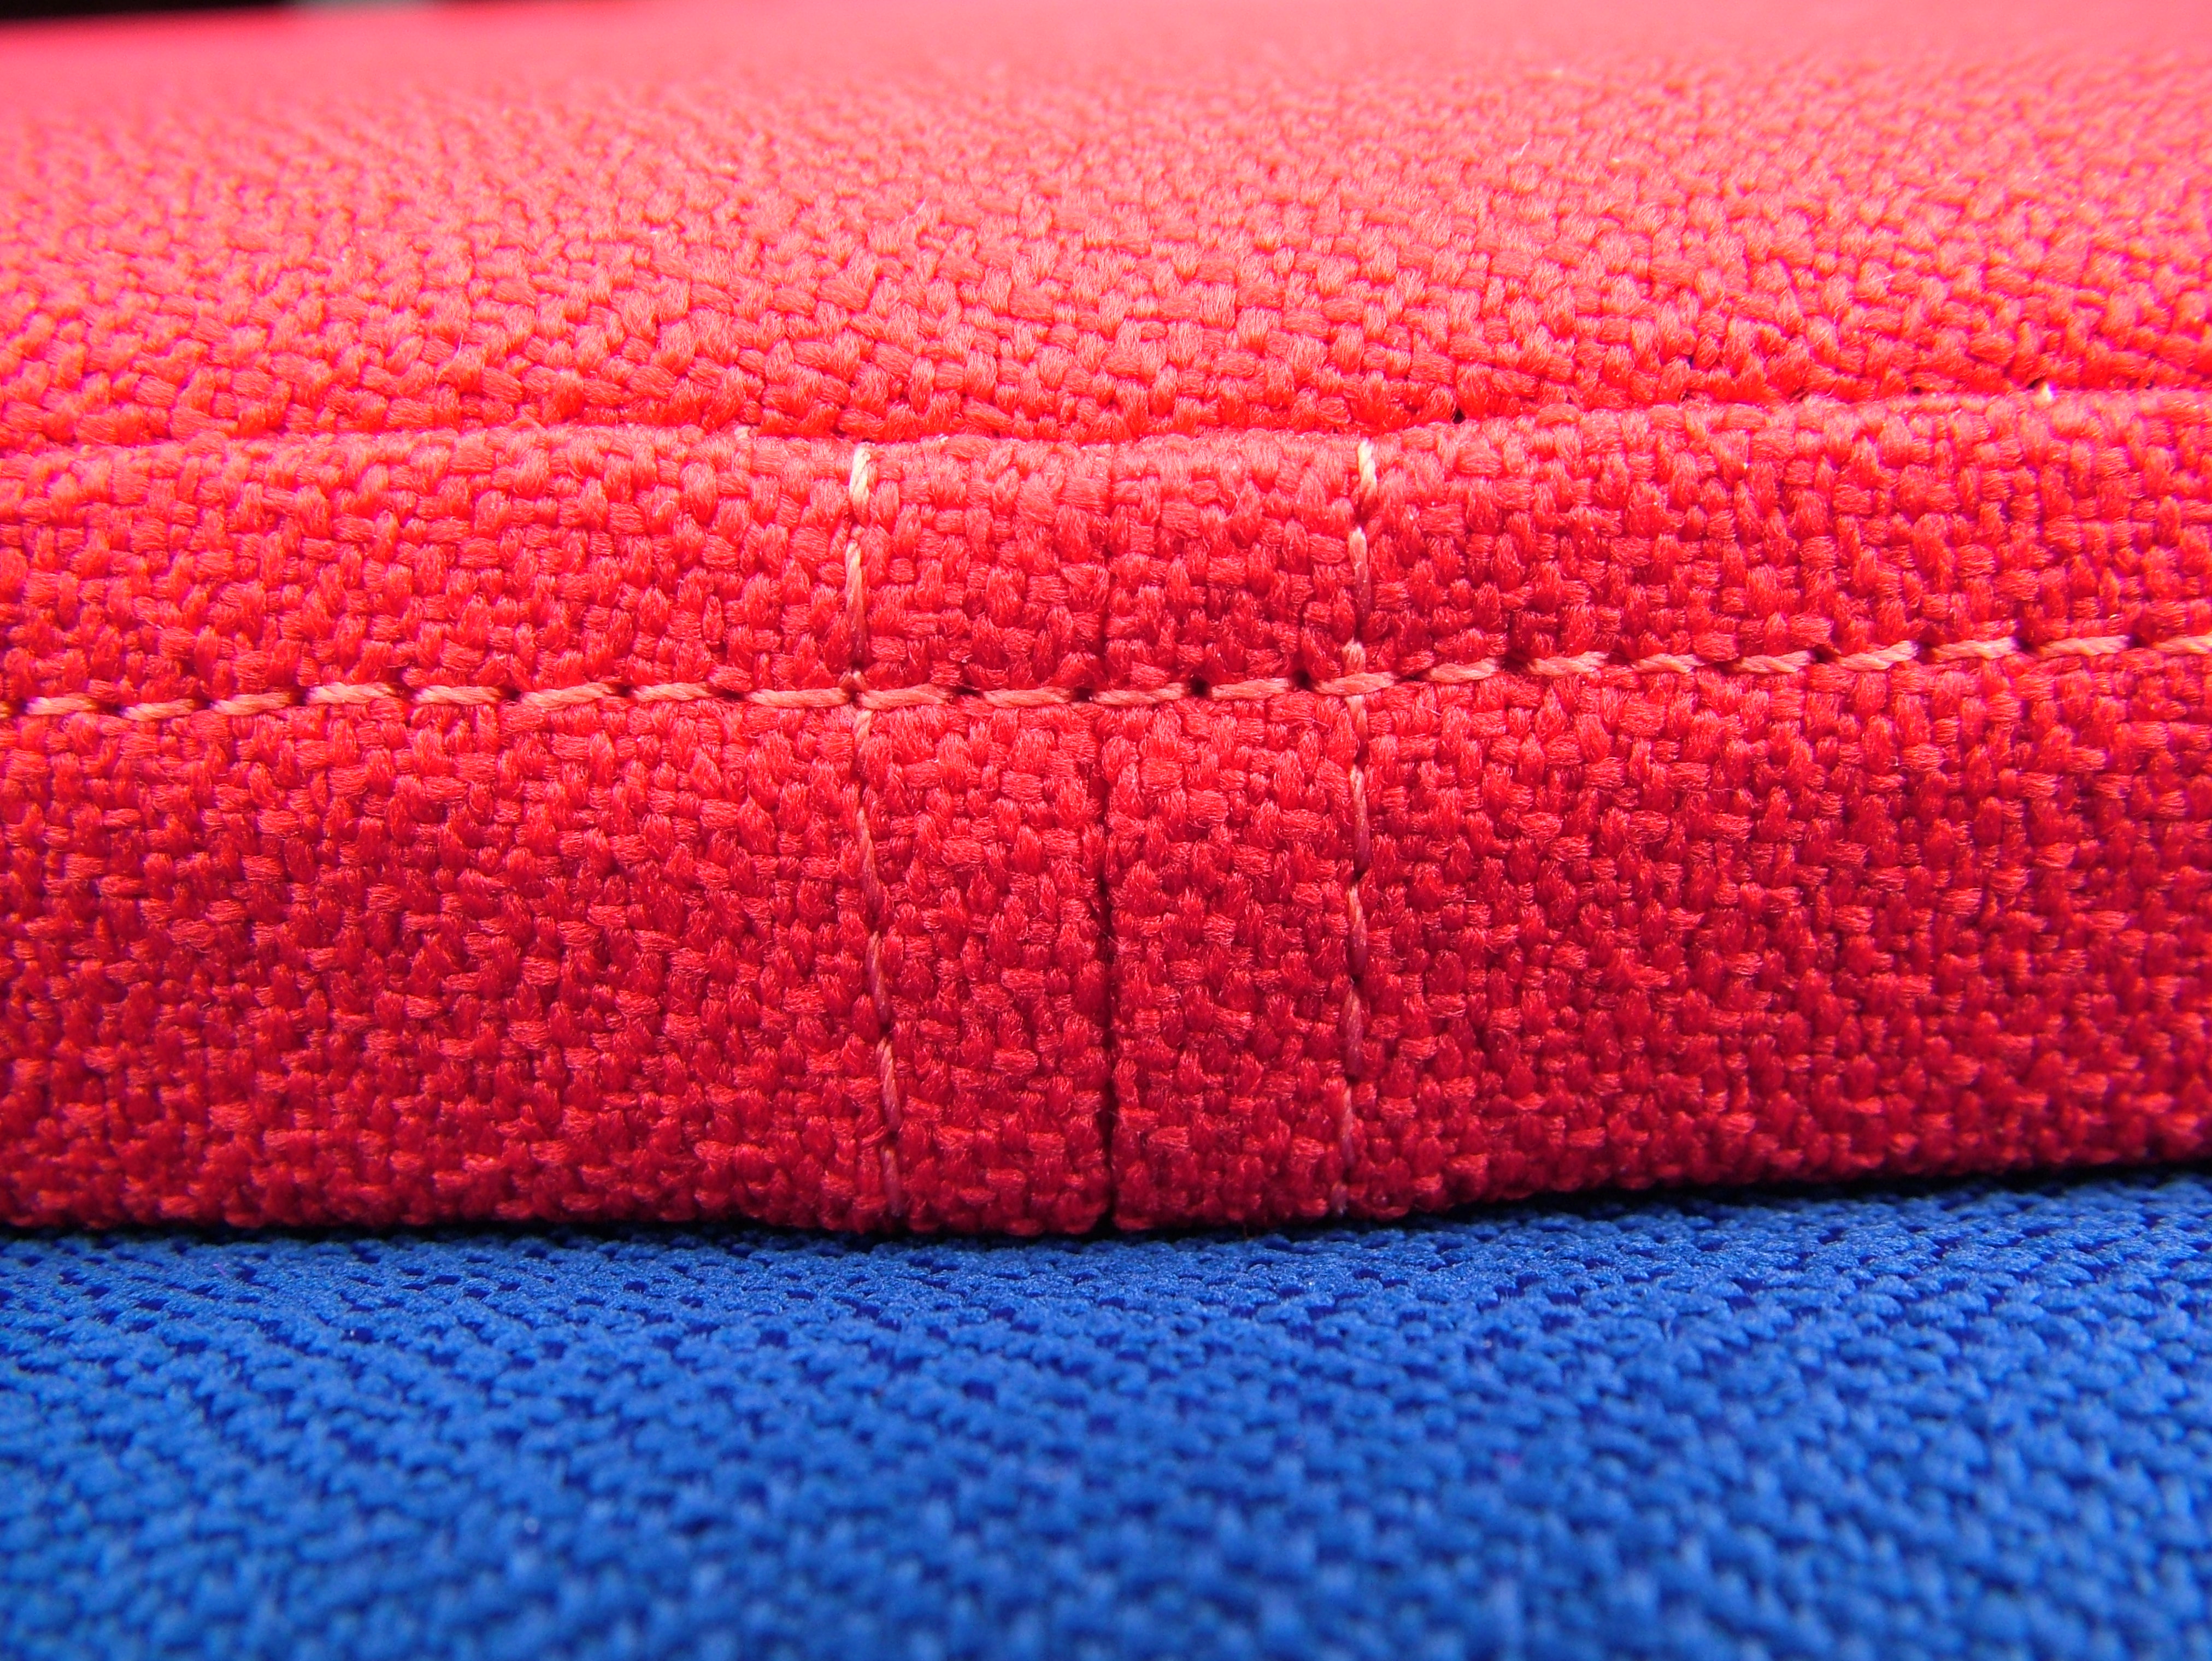 edge of tiles in red and blue showing stitched fabric